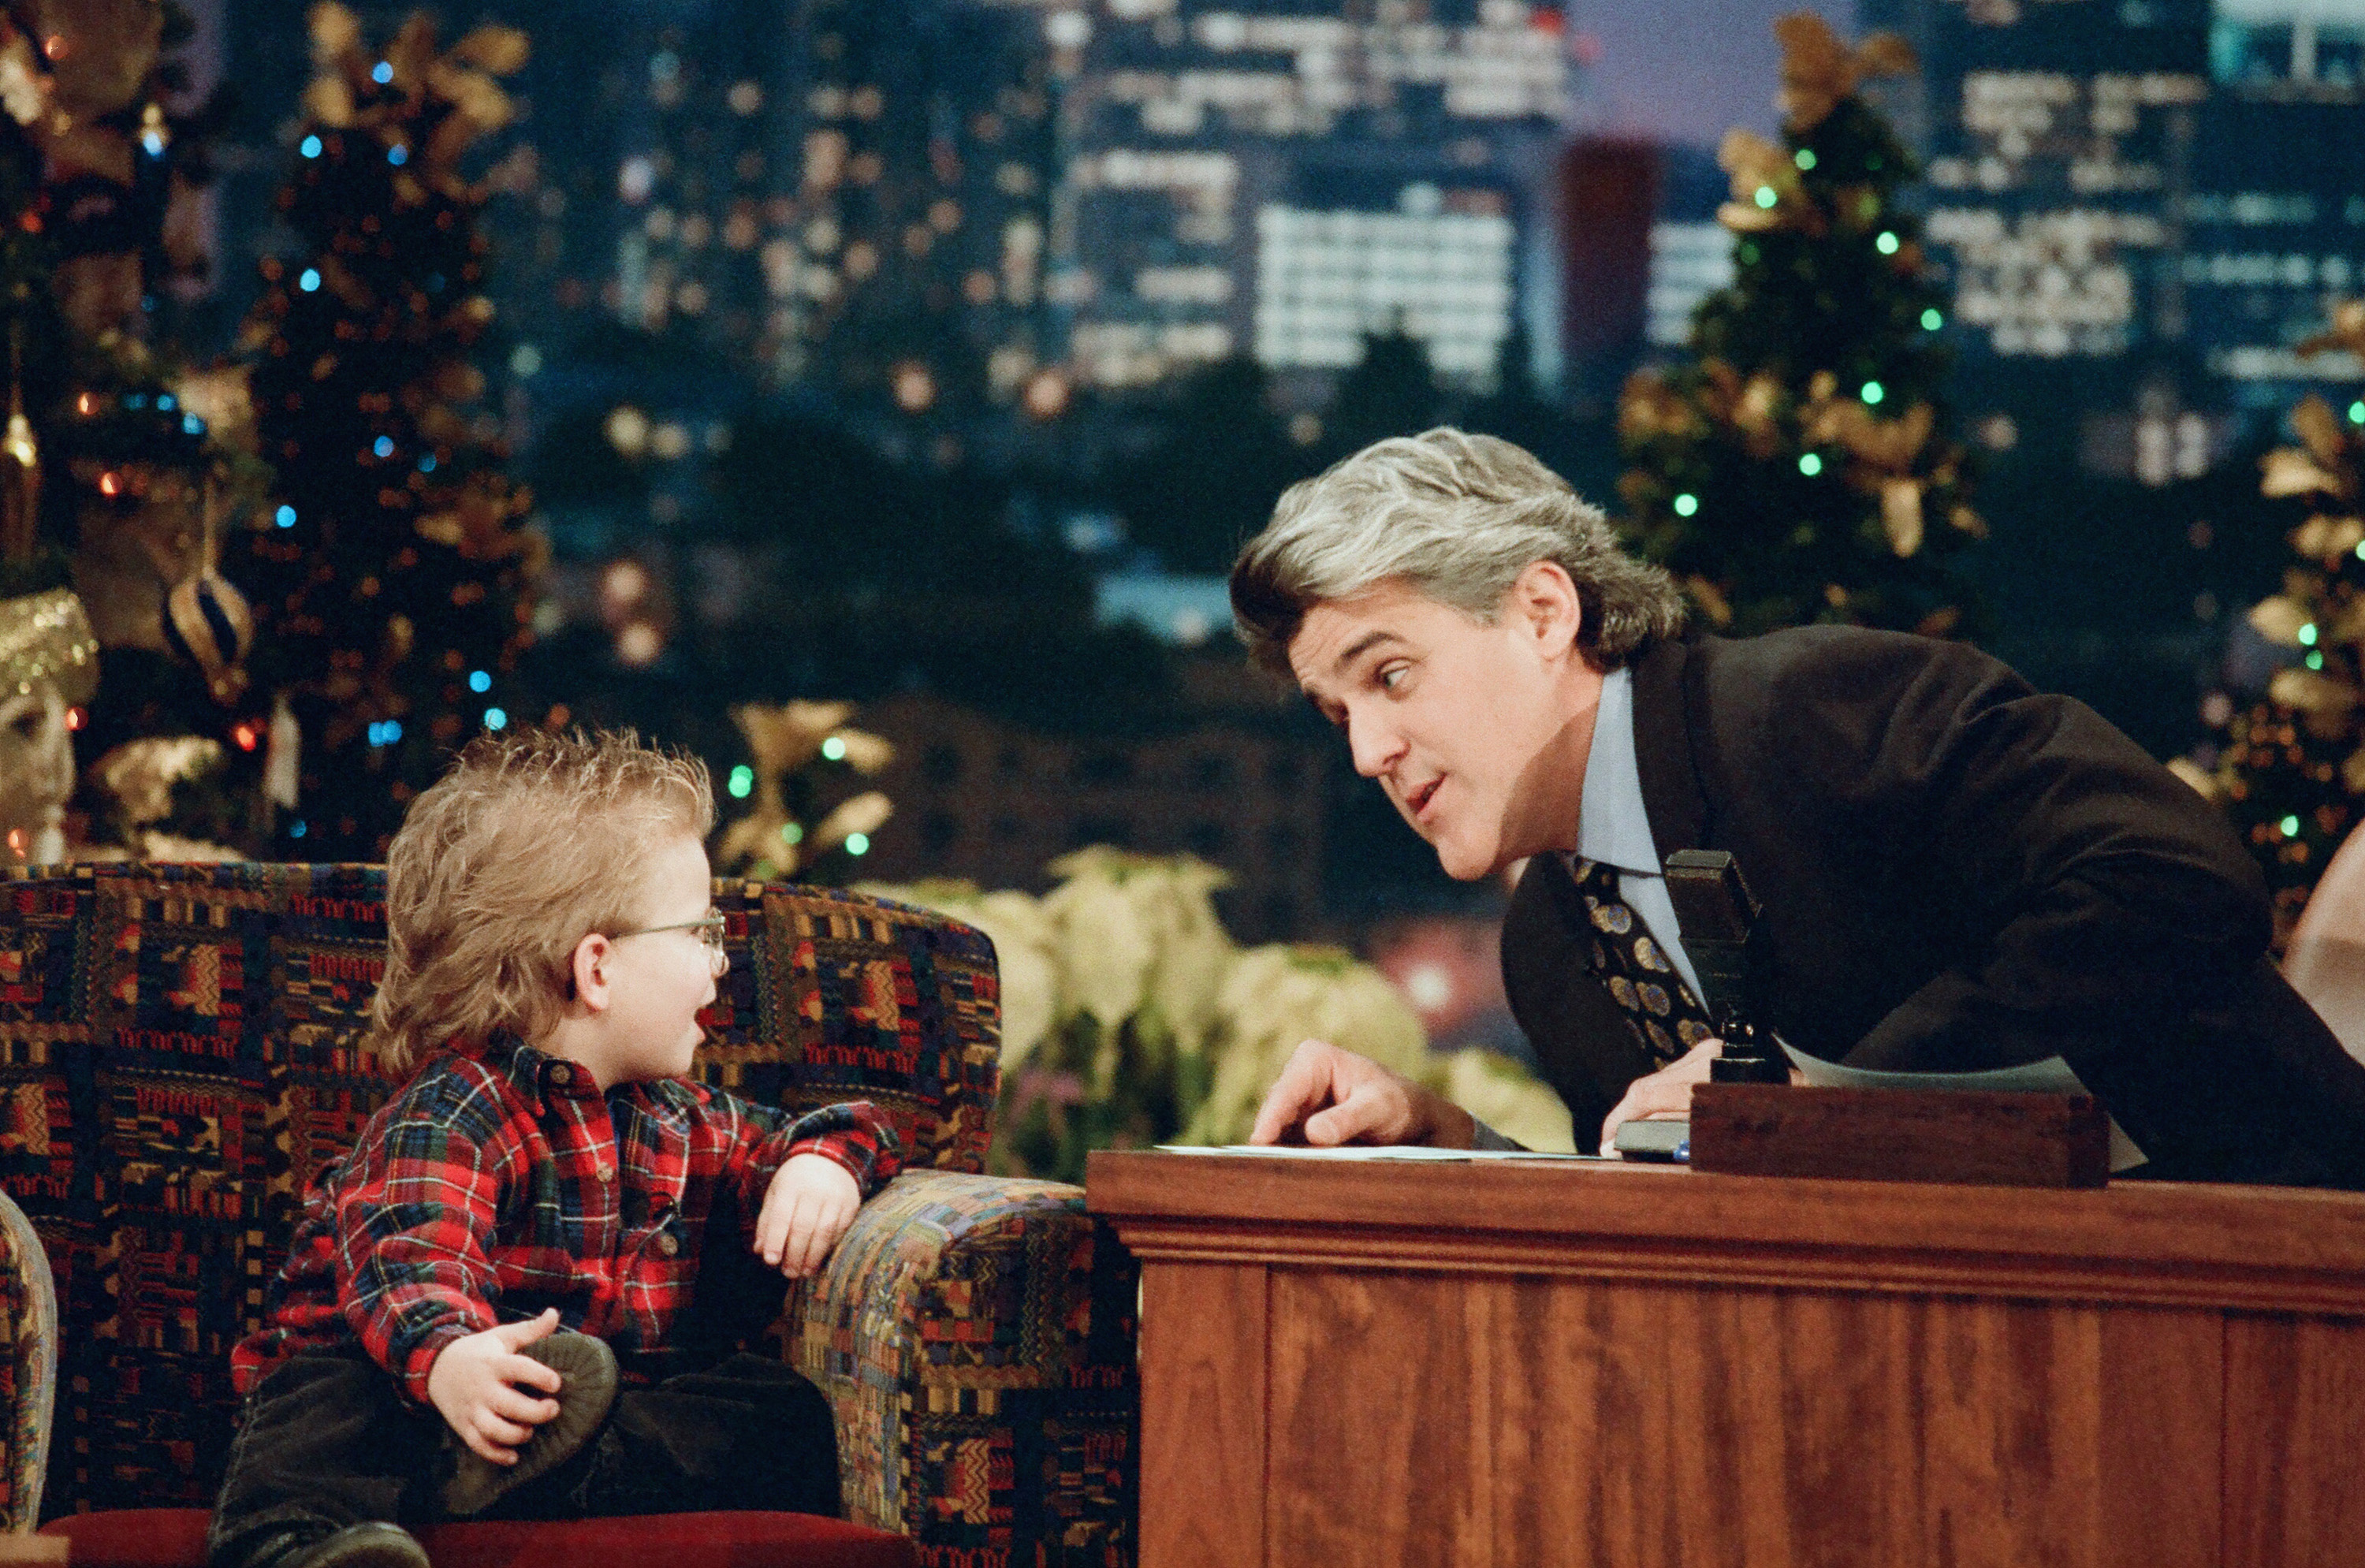 The child actor during an interview with Jay Leno in December 1996 | Source: Getty Images